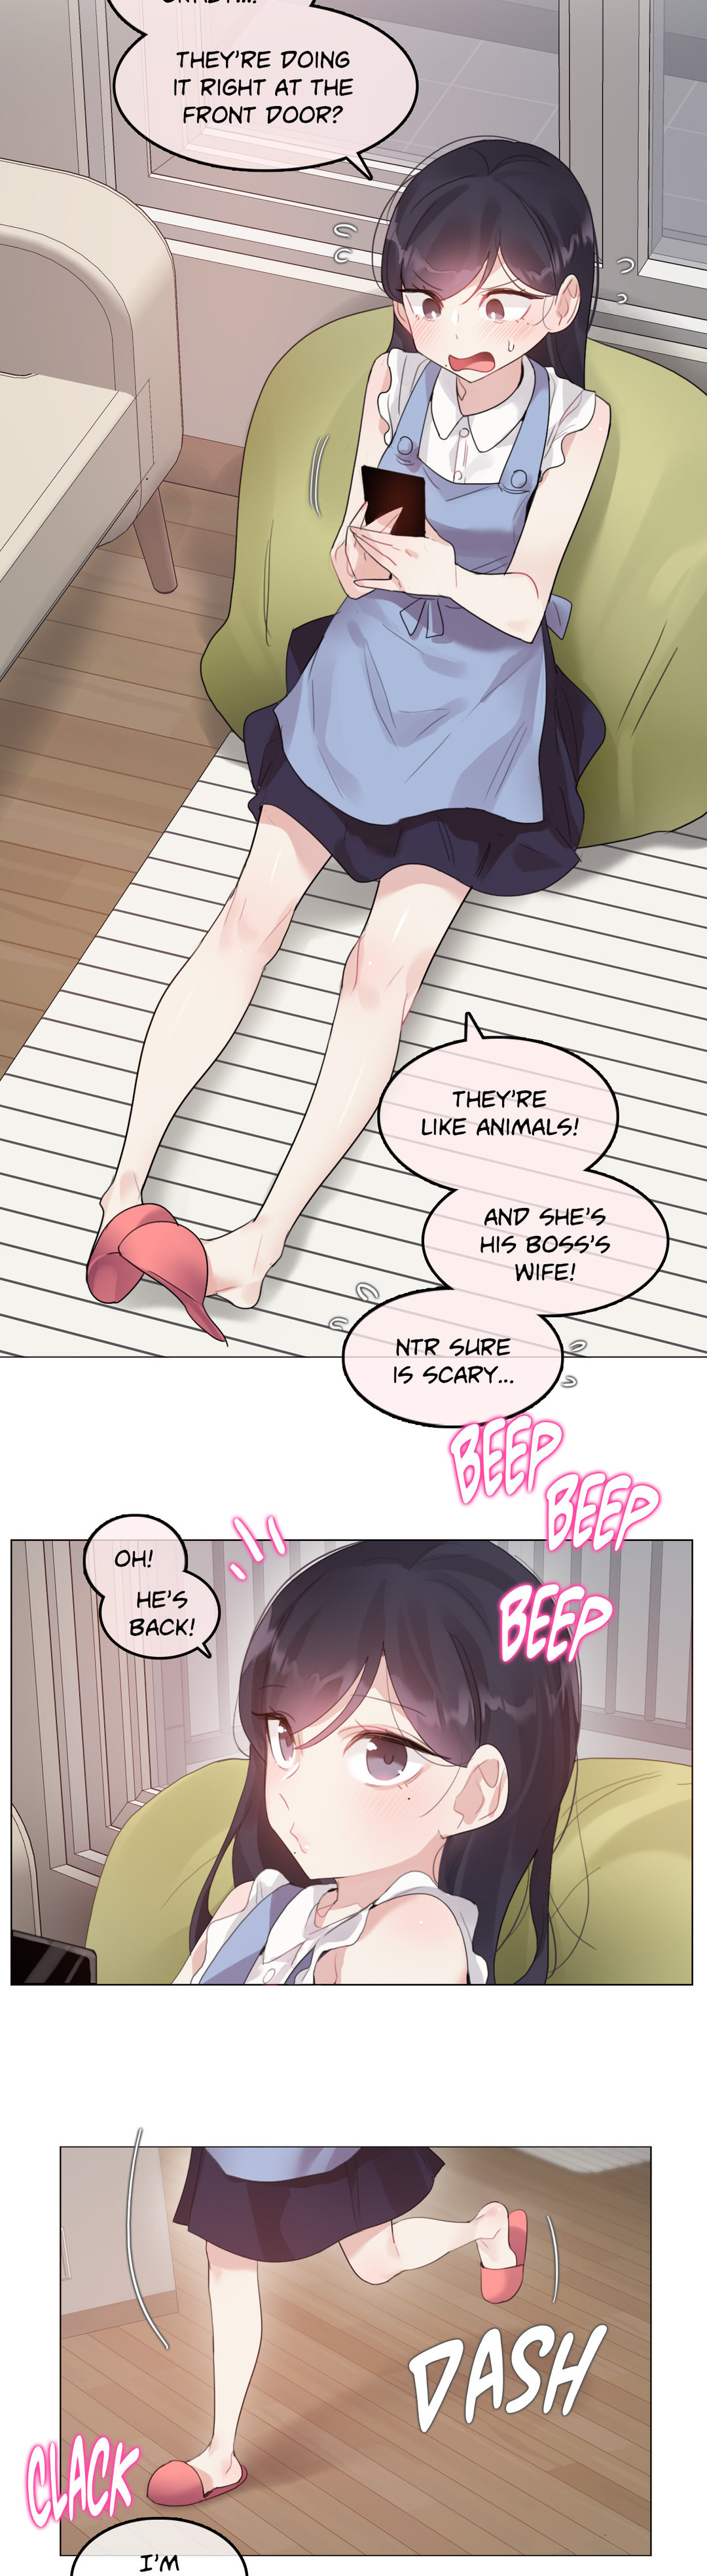 A Pervert’s Daily Life - Chapter 136 Page 2